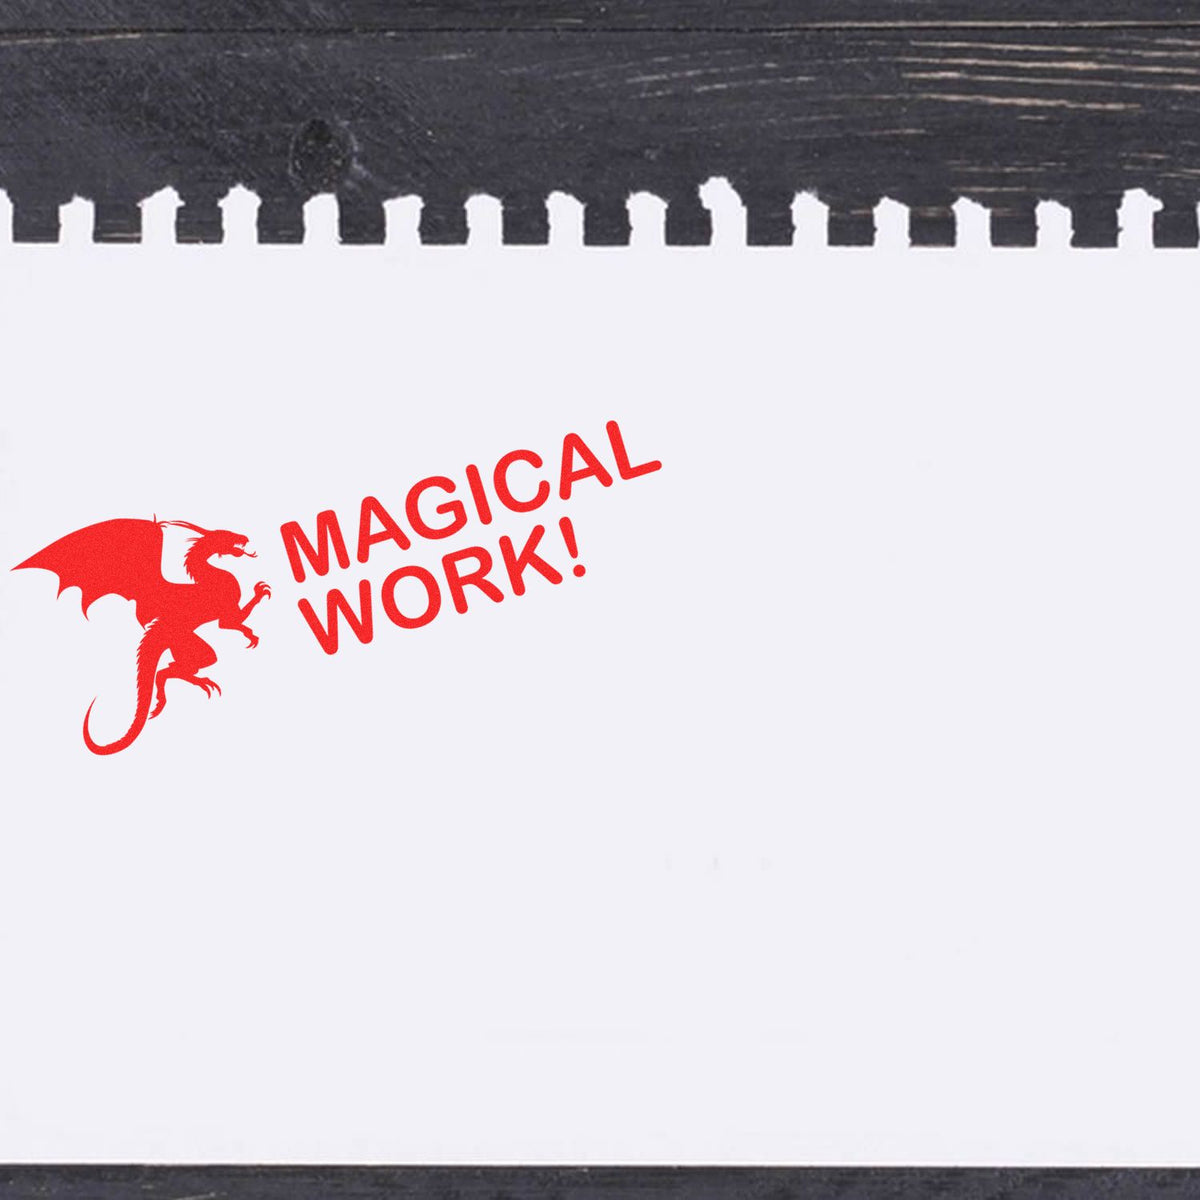 Dragon Magical Work Rubber Stamp In Use Photo